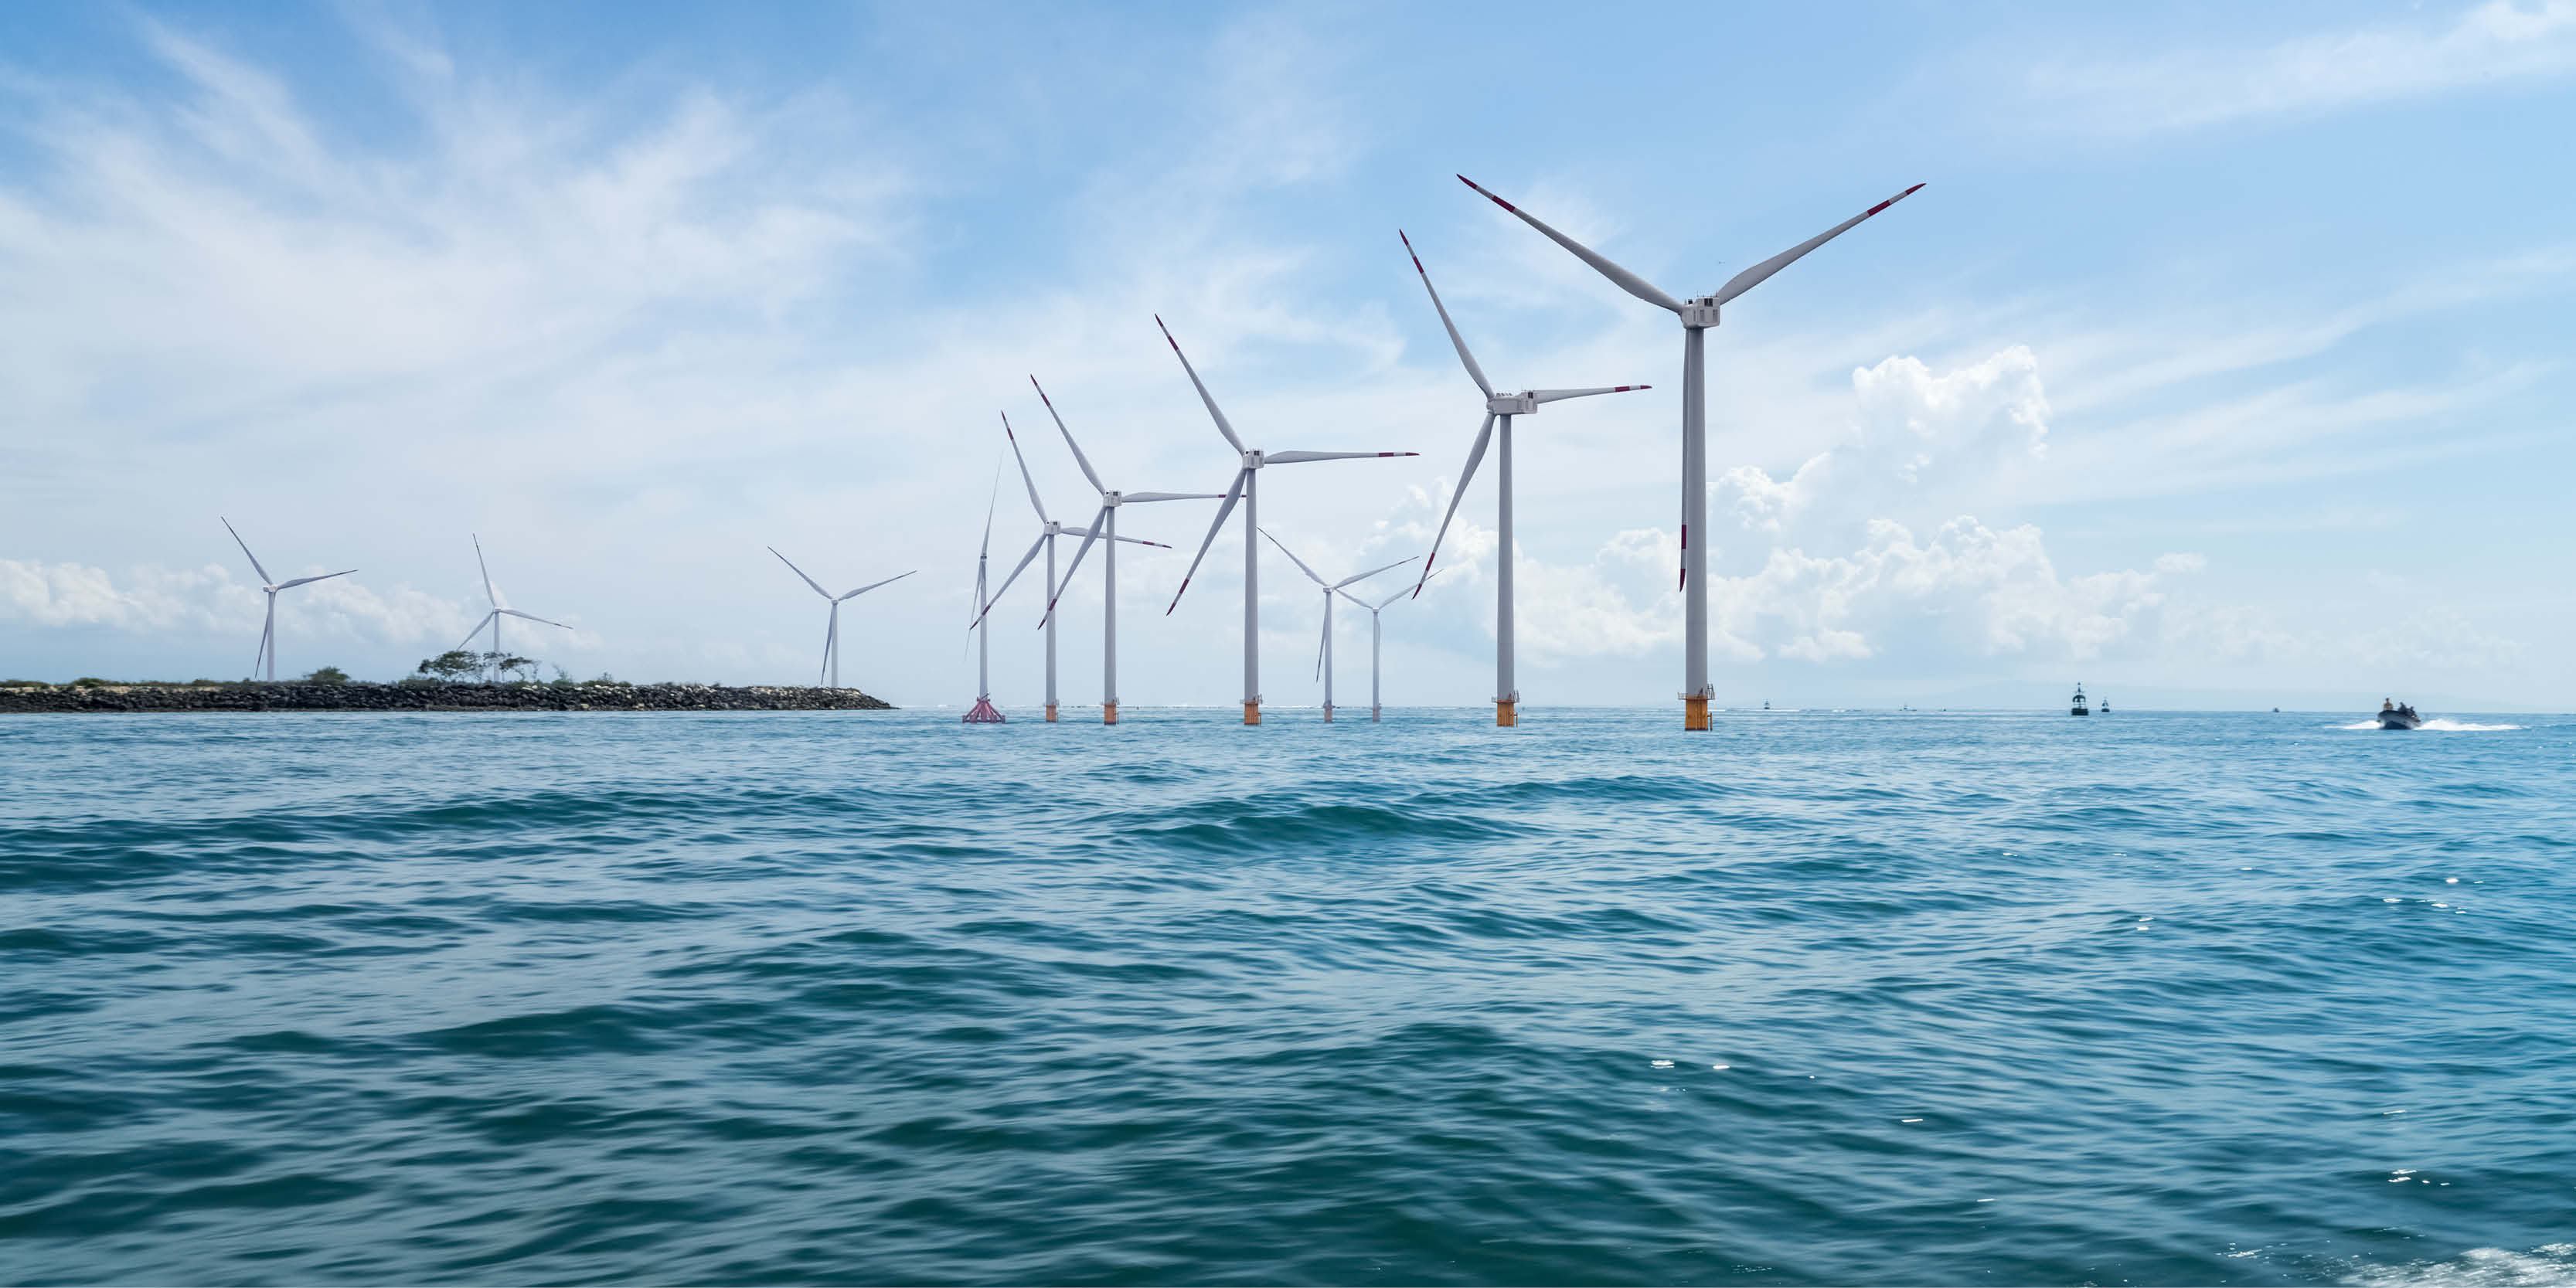 €4.2m funding for floating wind testbed project